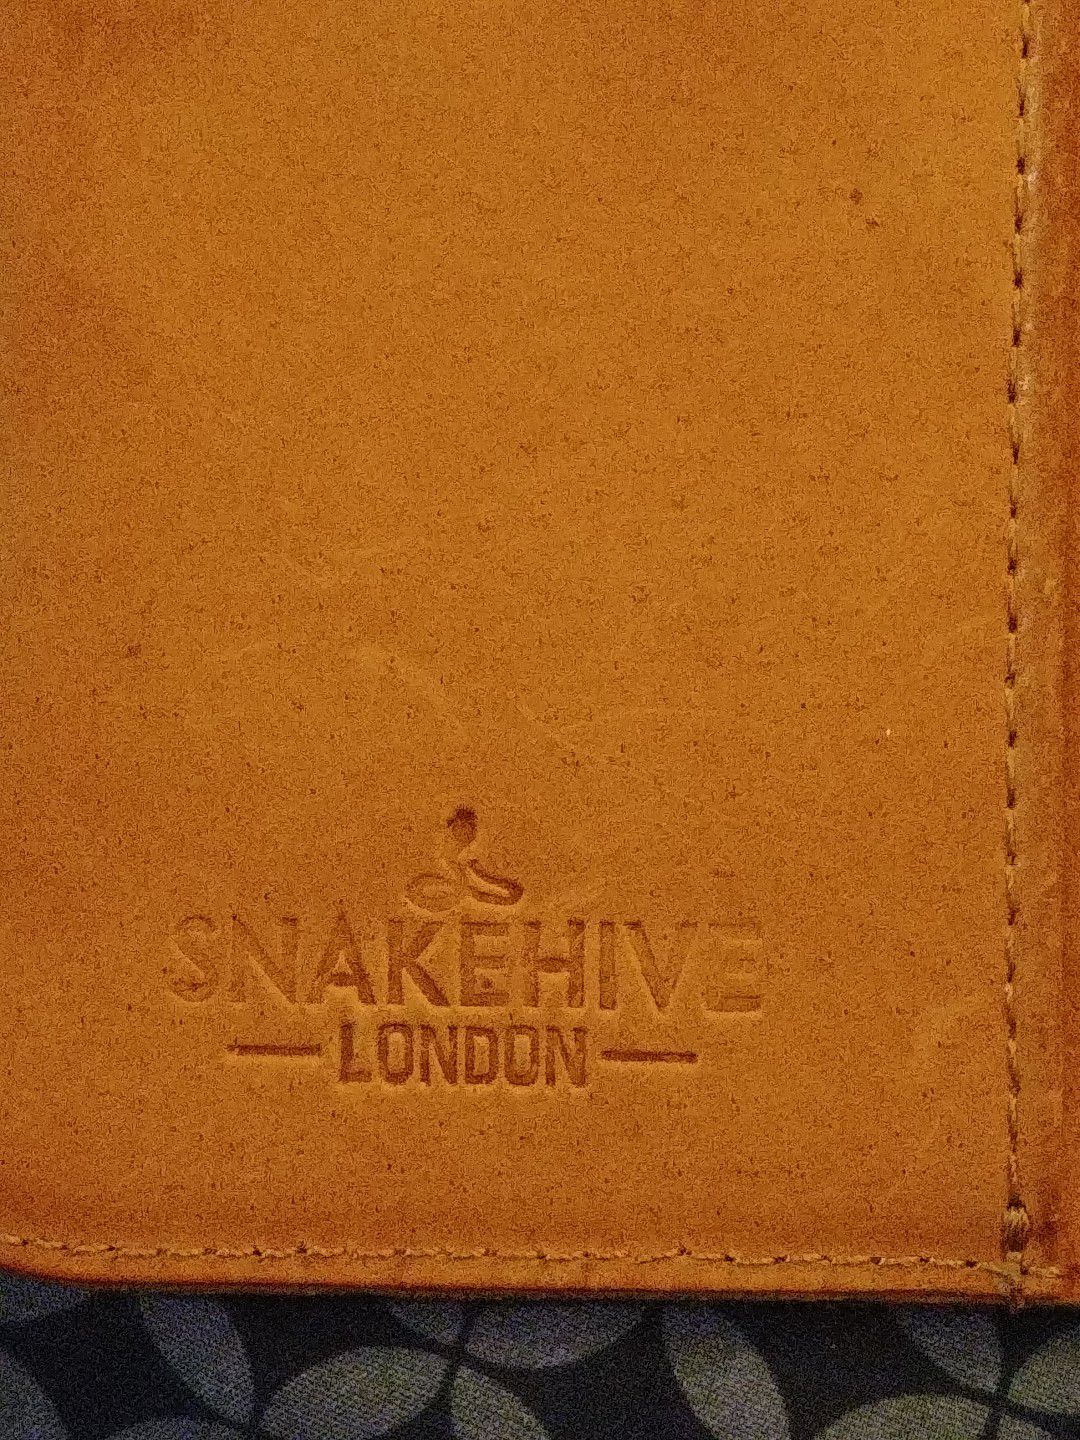 SNAKEHIVE London leather wallet case kickstad thingy